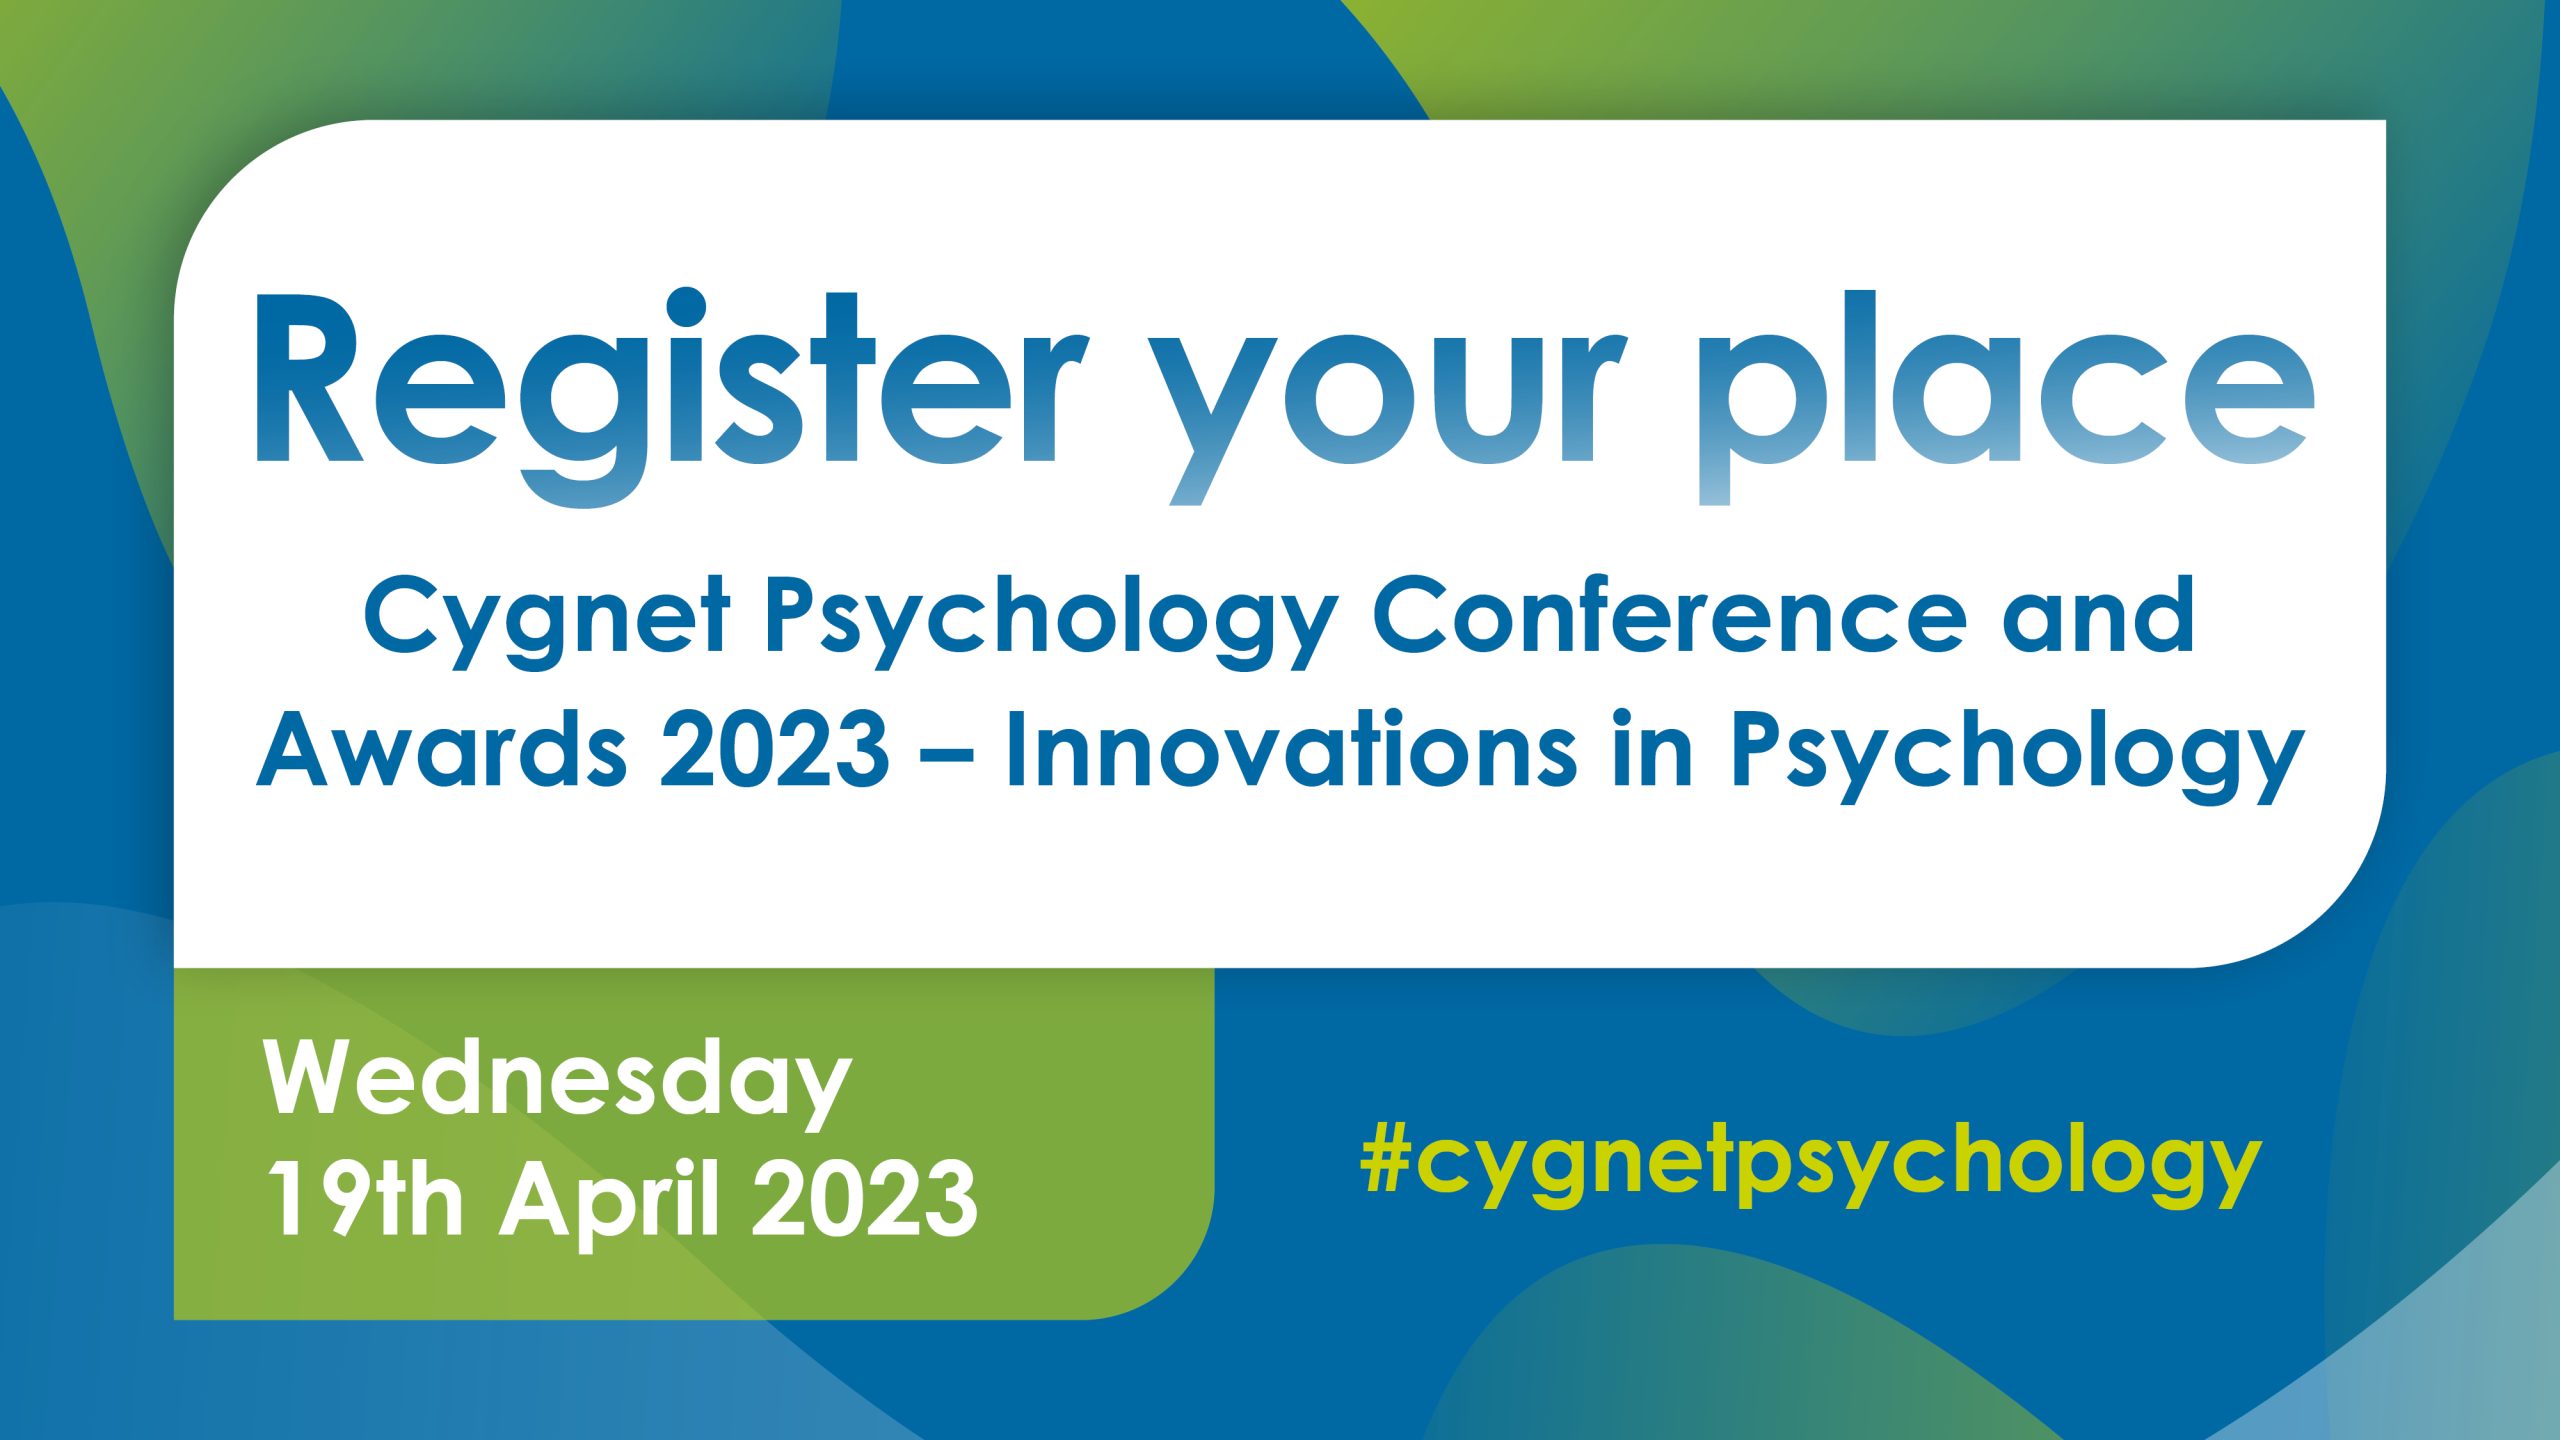 Annual Psychology Conference and Awards 2023